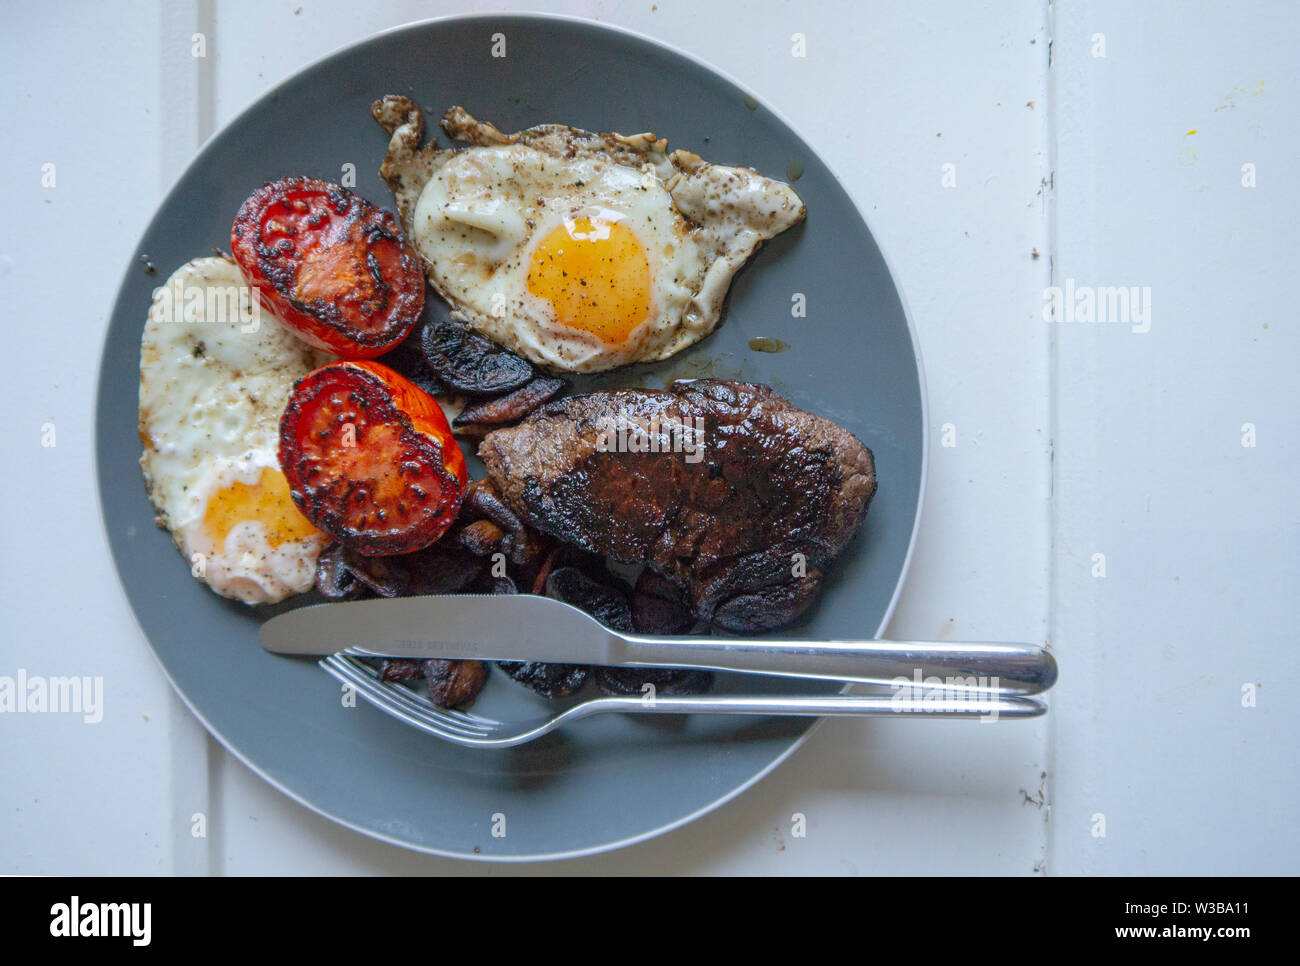 Overhead view of a plate of steak and eggs and fried tomato Stock Photo